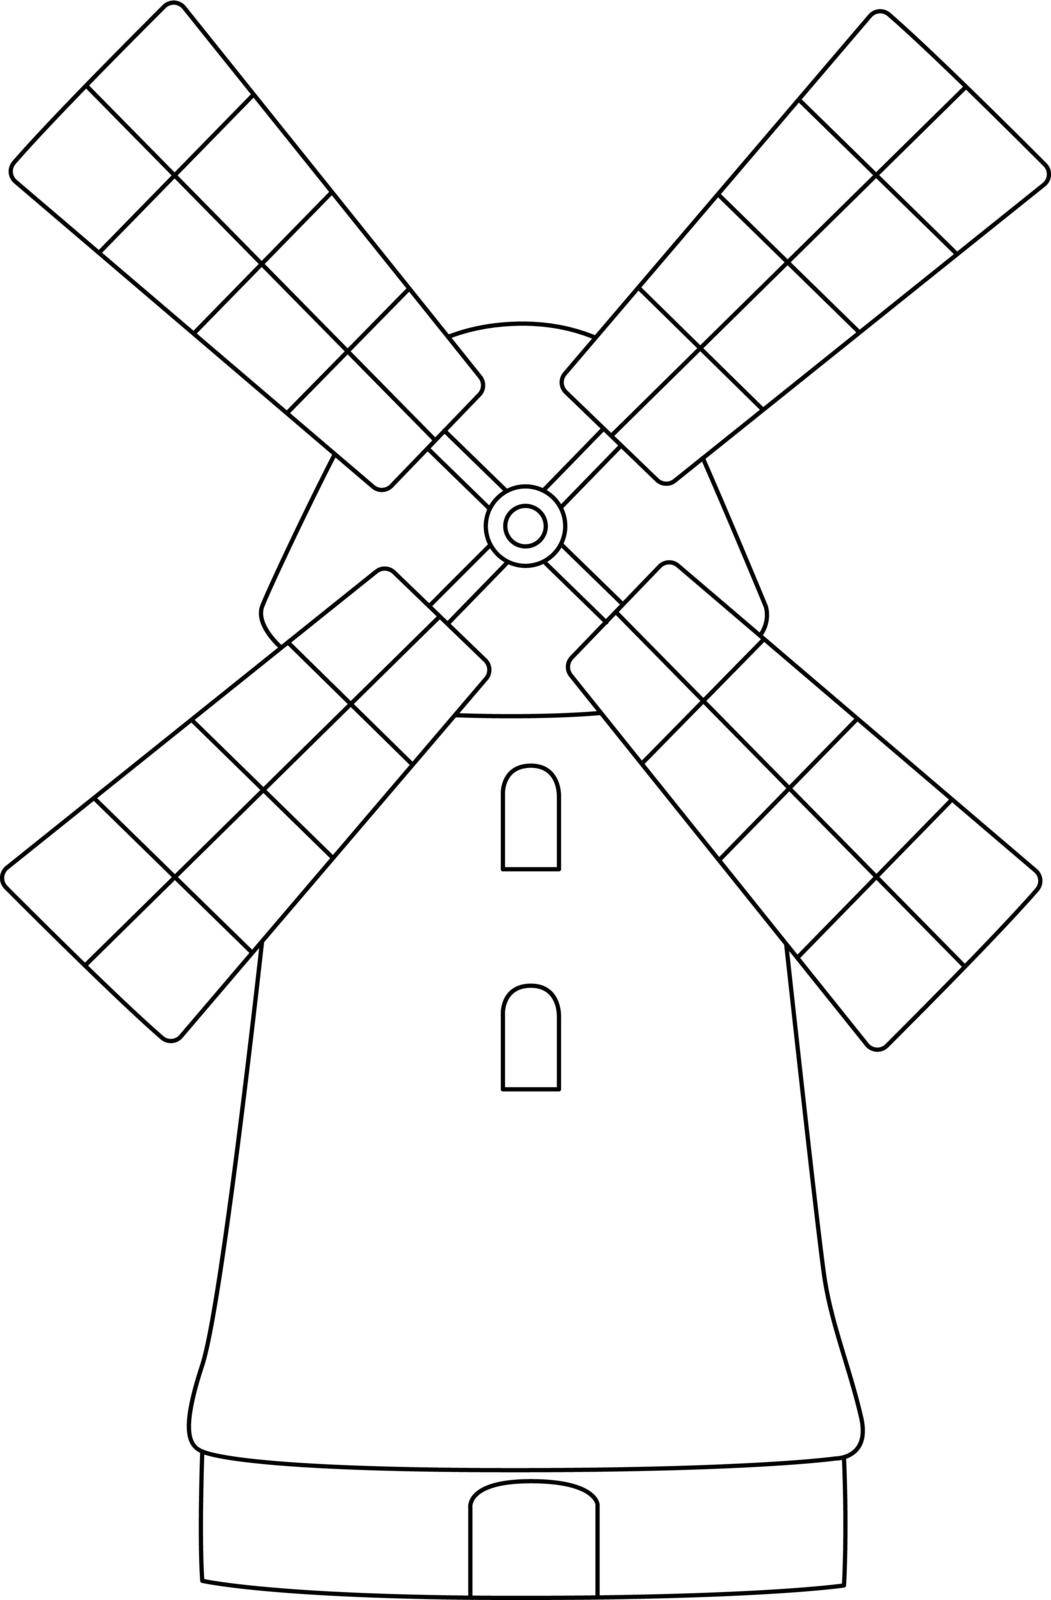 Windmill Coloring Page Isolated for Kids by abbydesign